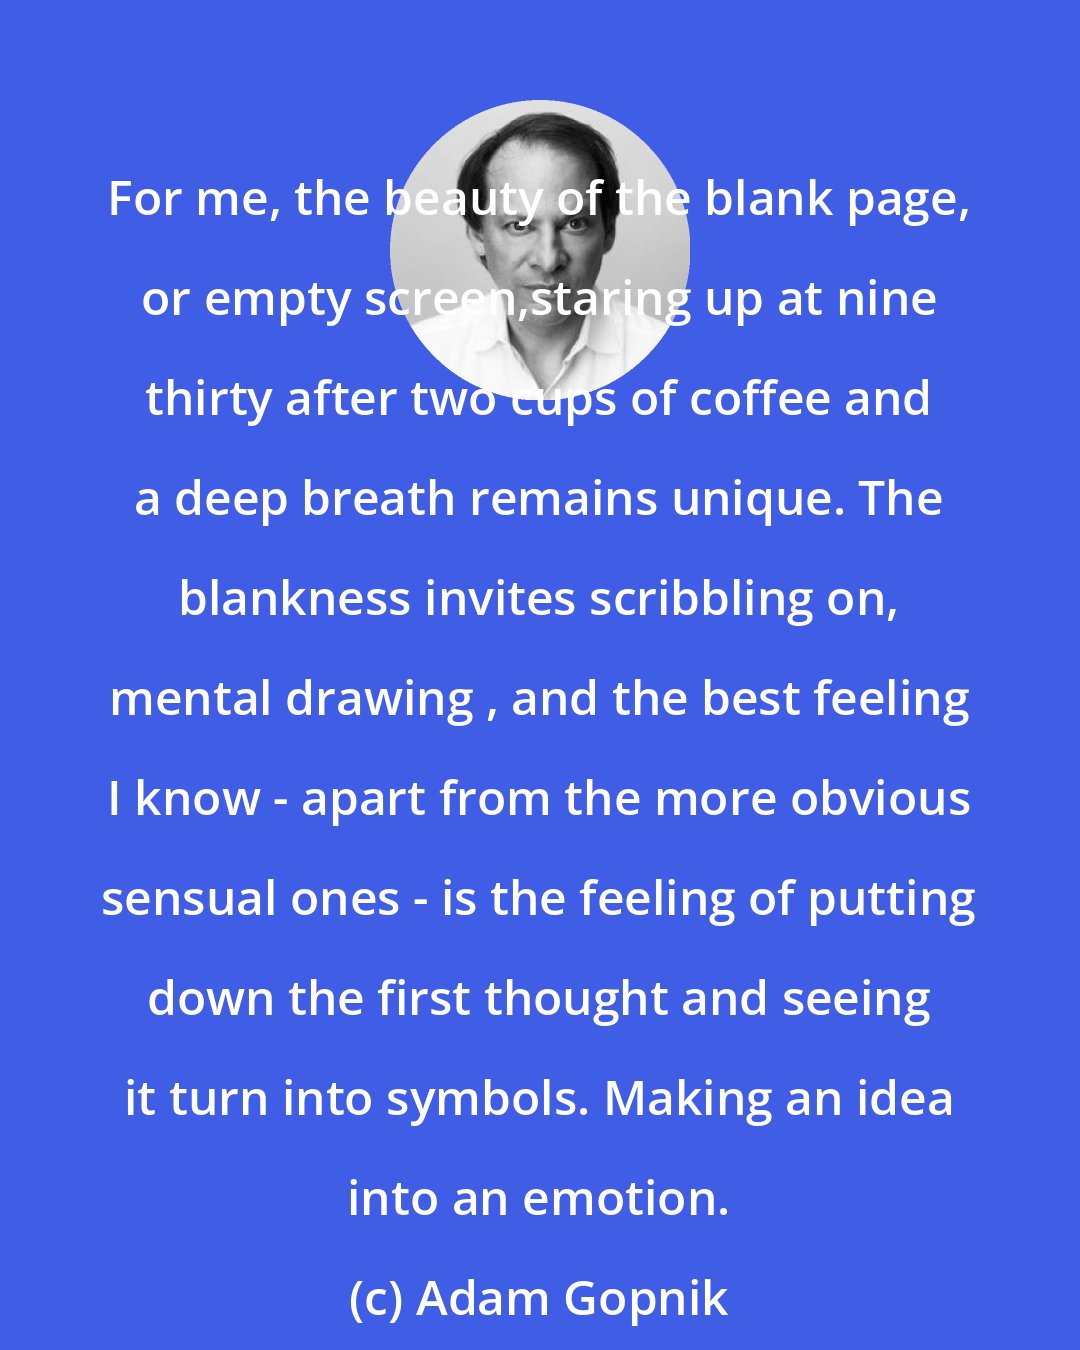 Adam Gopnik: For me, the beauty of the blank page, or empty screen,staring up at nine thirty after two cups of coffee and a deep breath remains unique. The blankness invites scribbling on, mental drawing , and the best feeling I know - apart from the more obvious sensual ones - is the feeling of putting down the first thought and seeing it turn into symbols. Making an idea into an emotion.